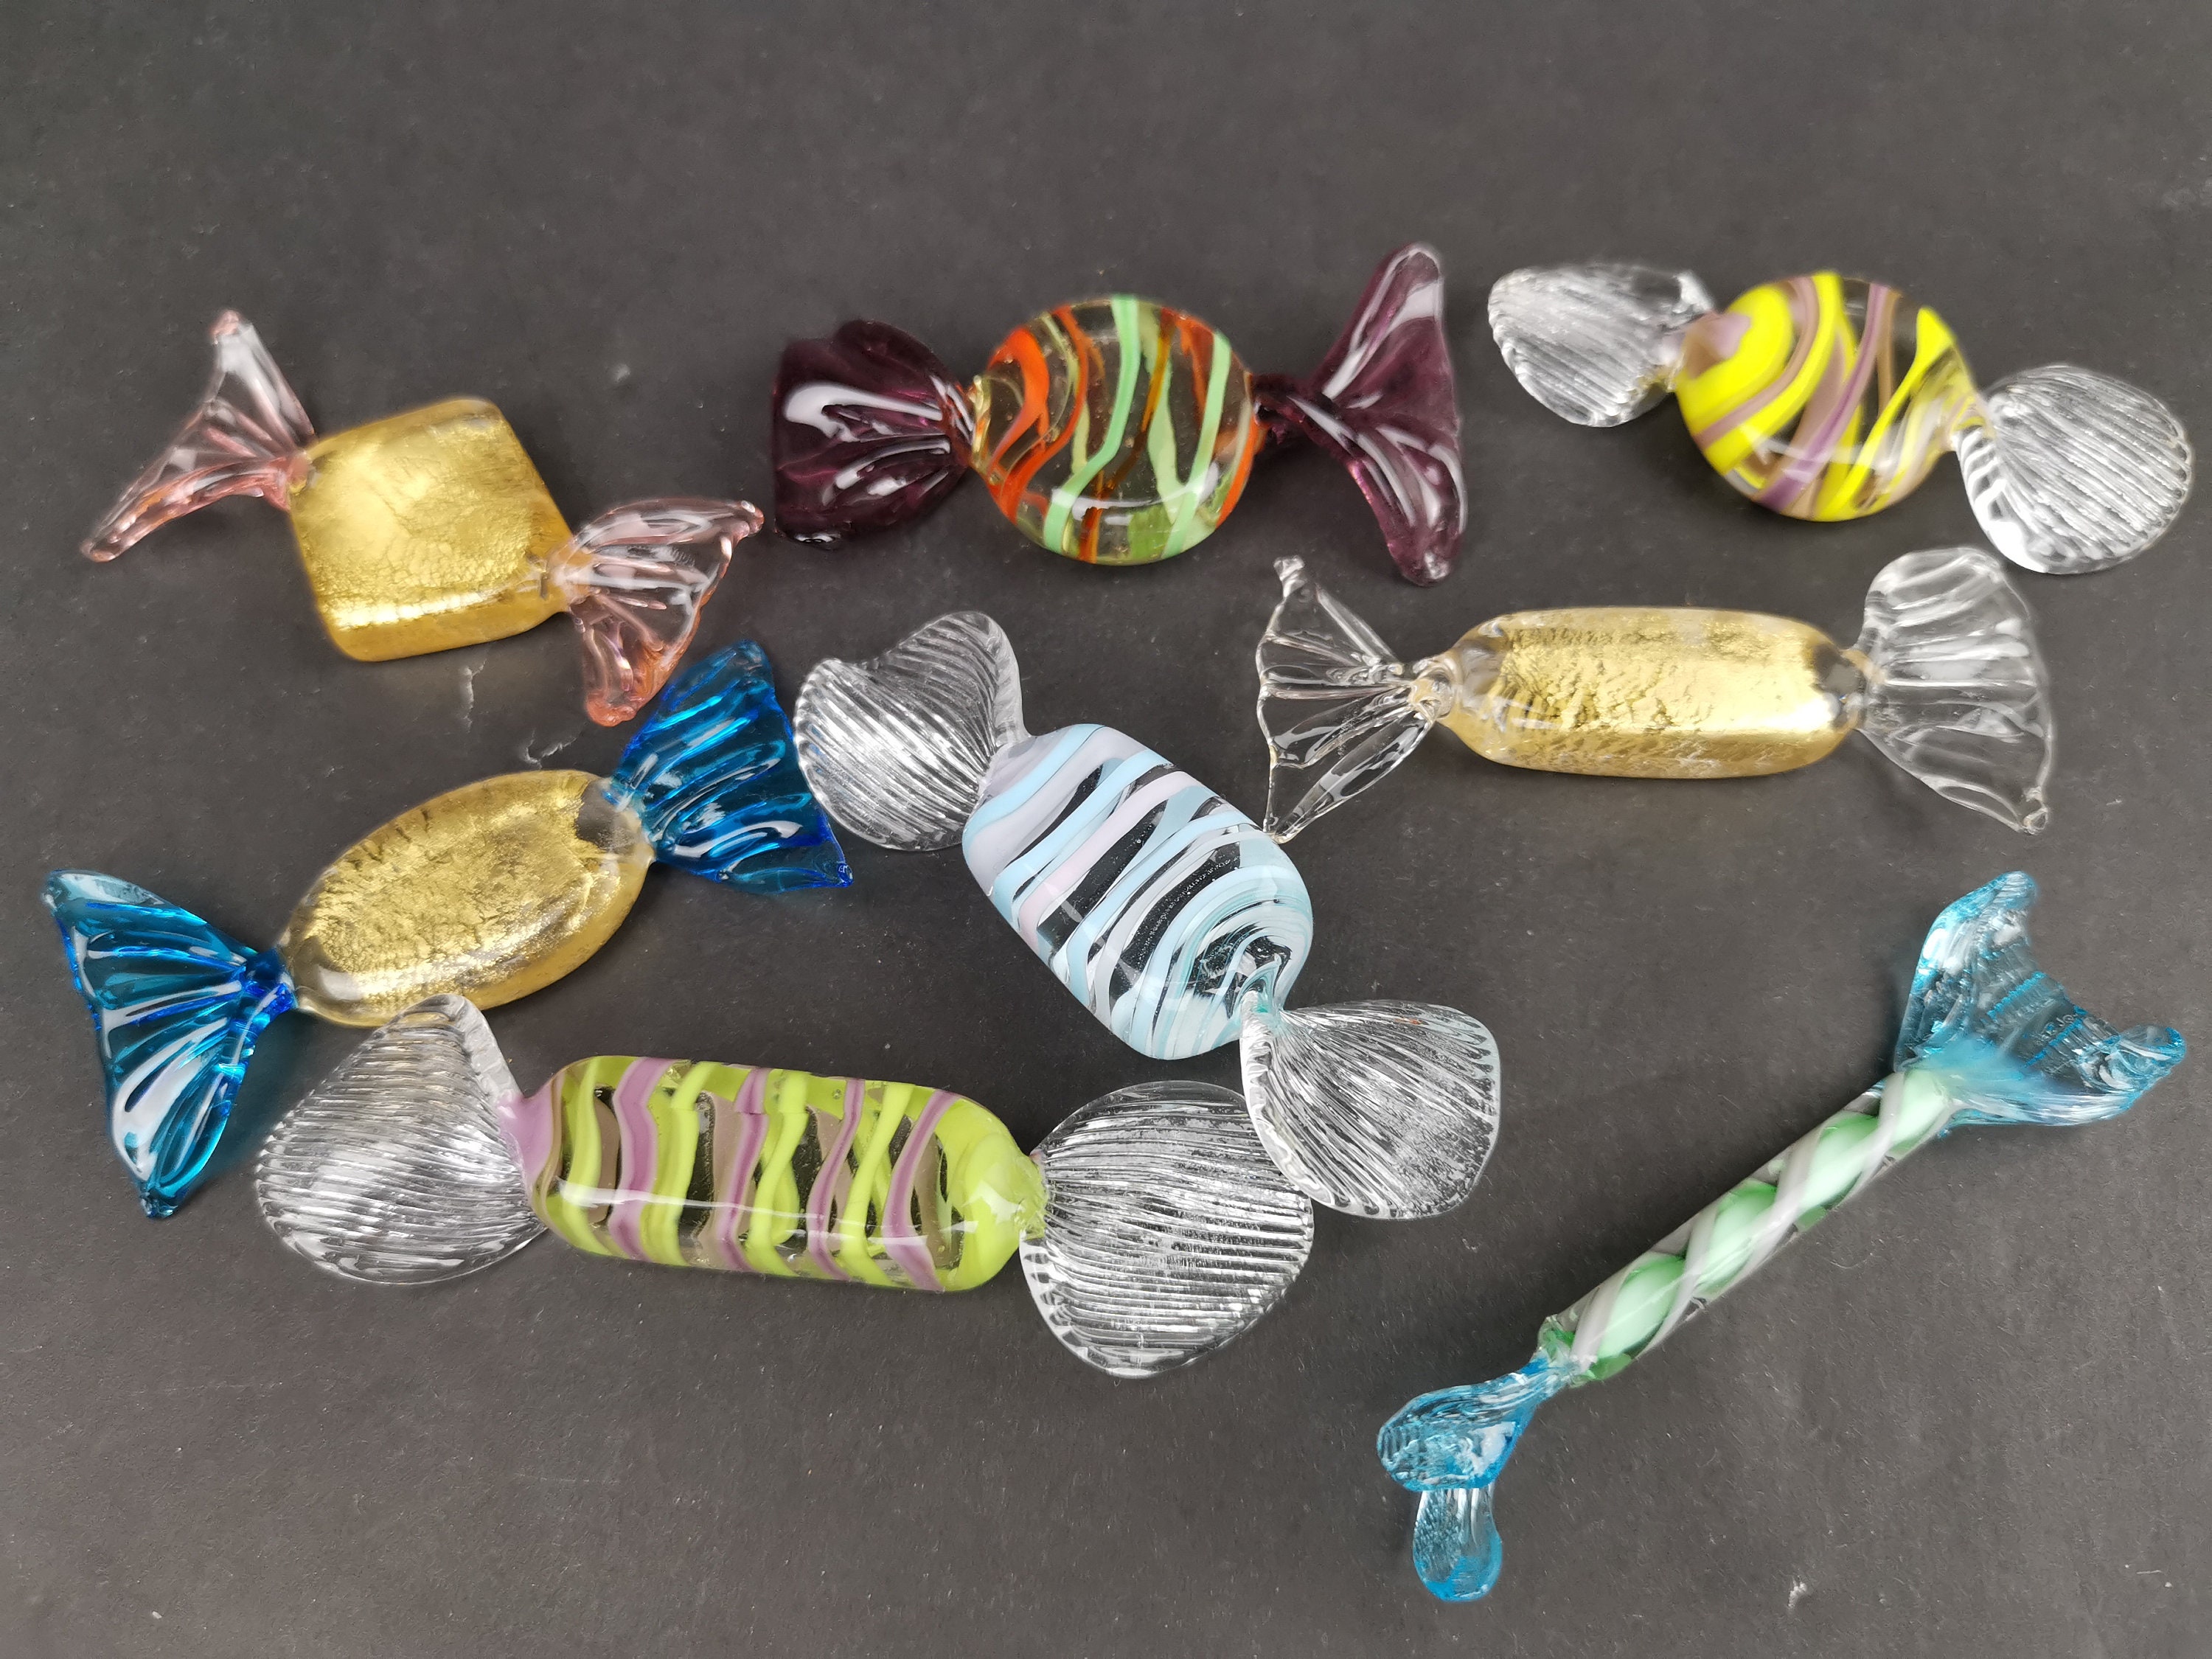 Vintage Glass Blown Wrapped Small Candy Figures, Candies Decoration in  Multi Colors Glass Art Vintage Glass Candy Pieces Halloween Gift 